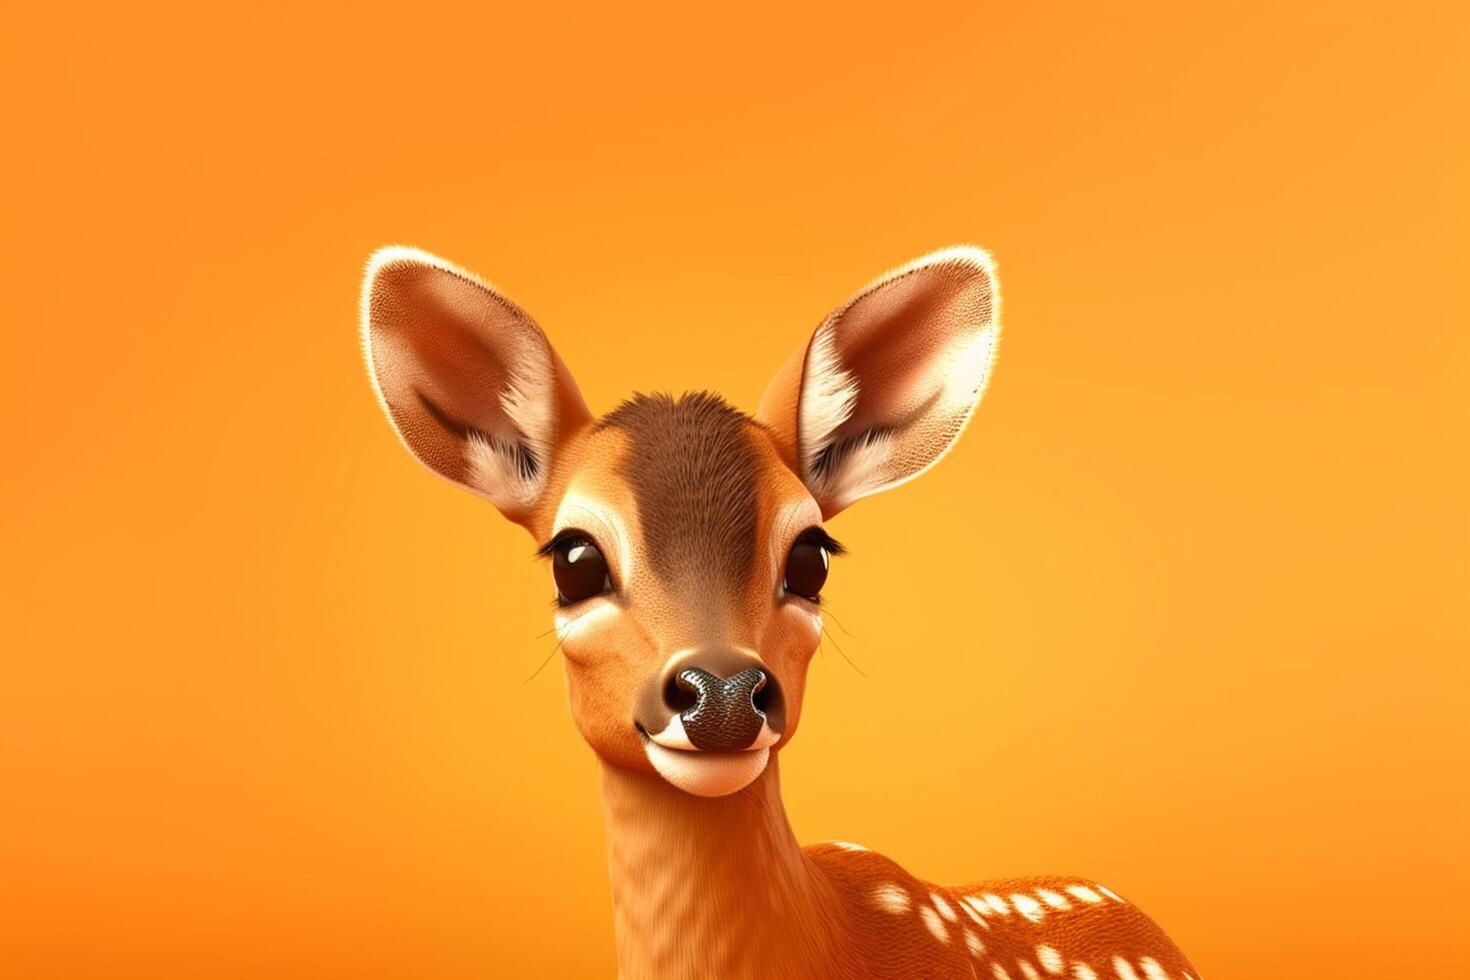 Cute deer on orange background with copy space for text. photo